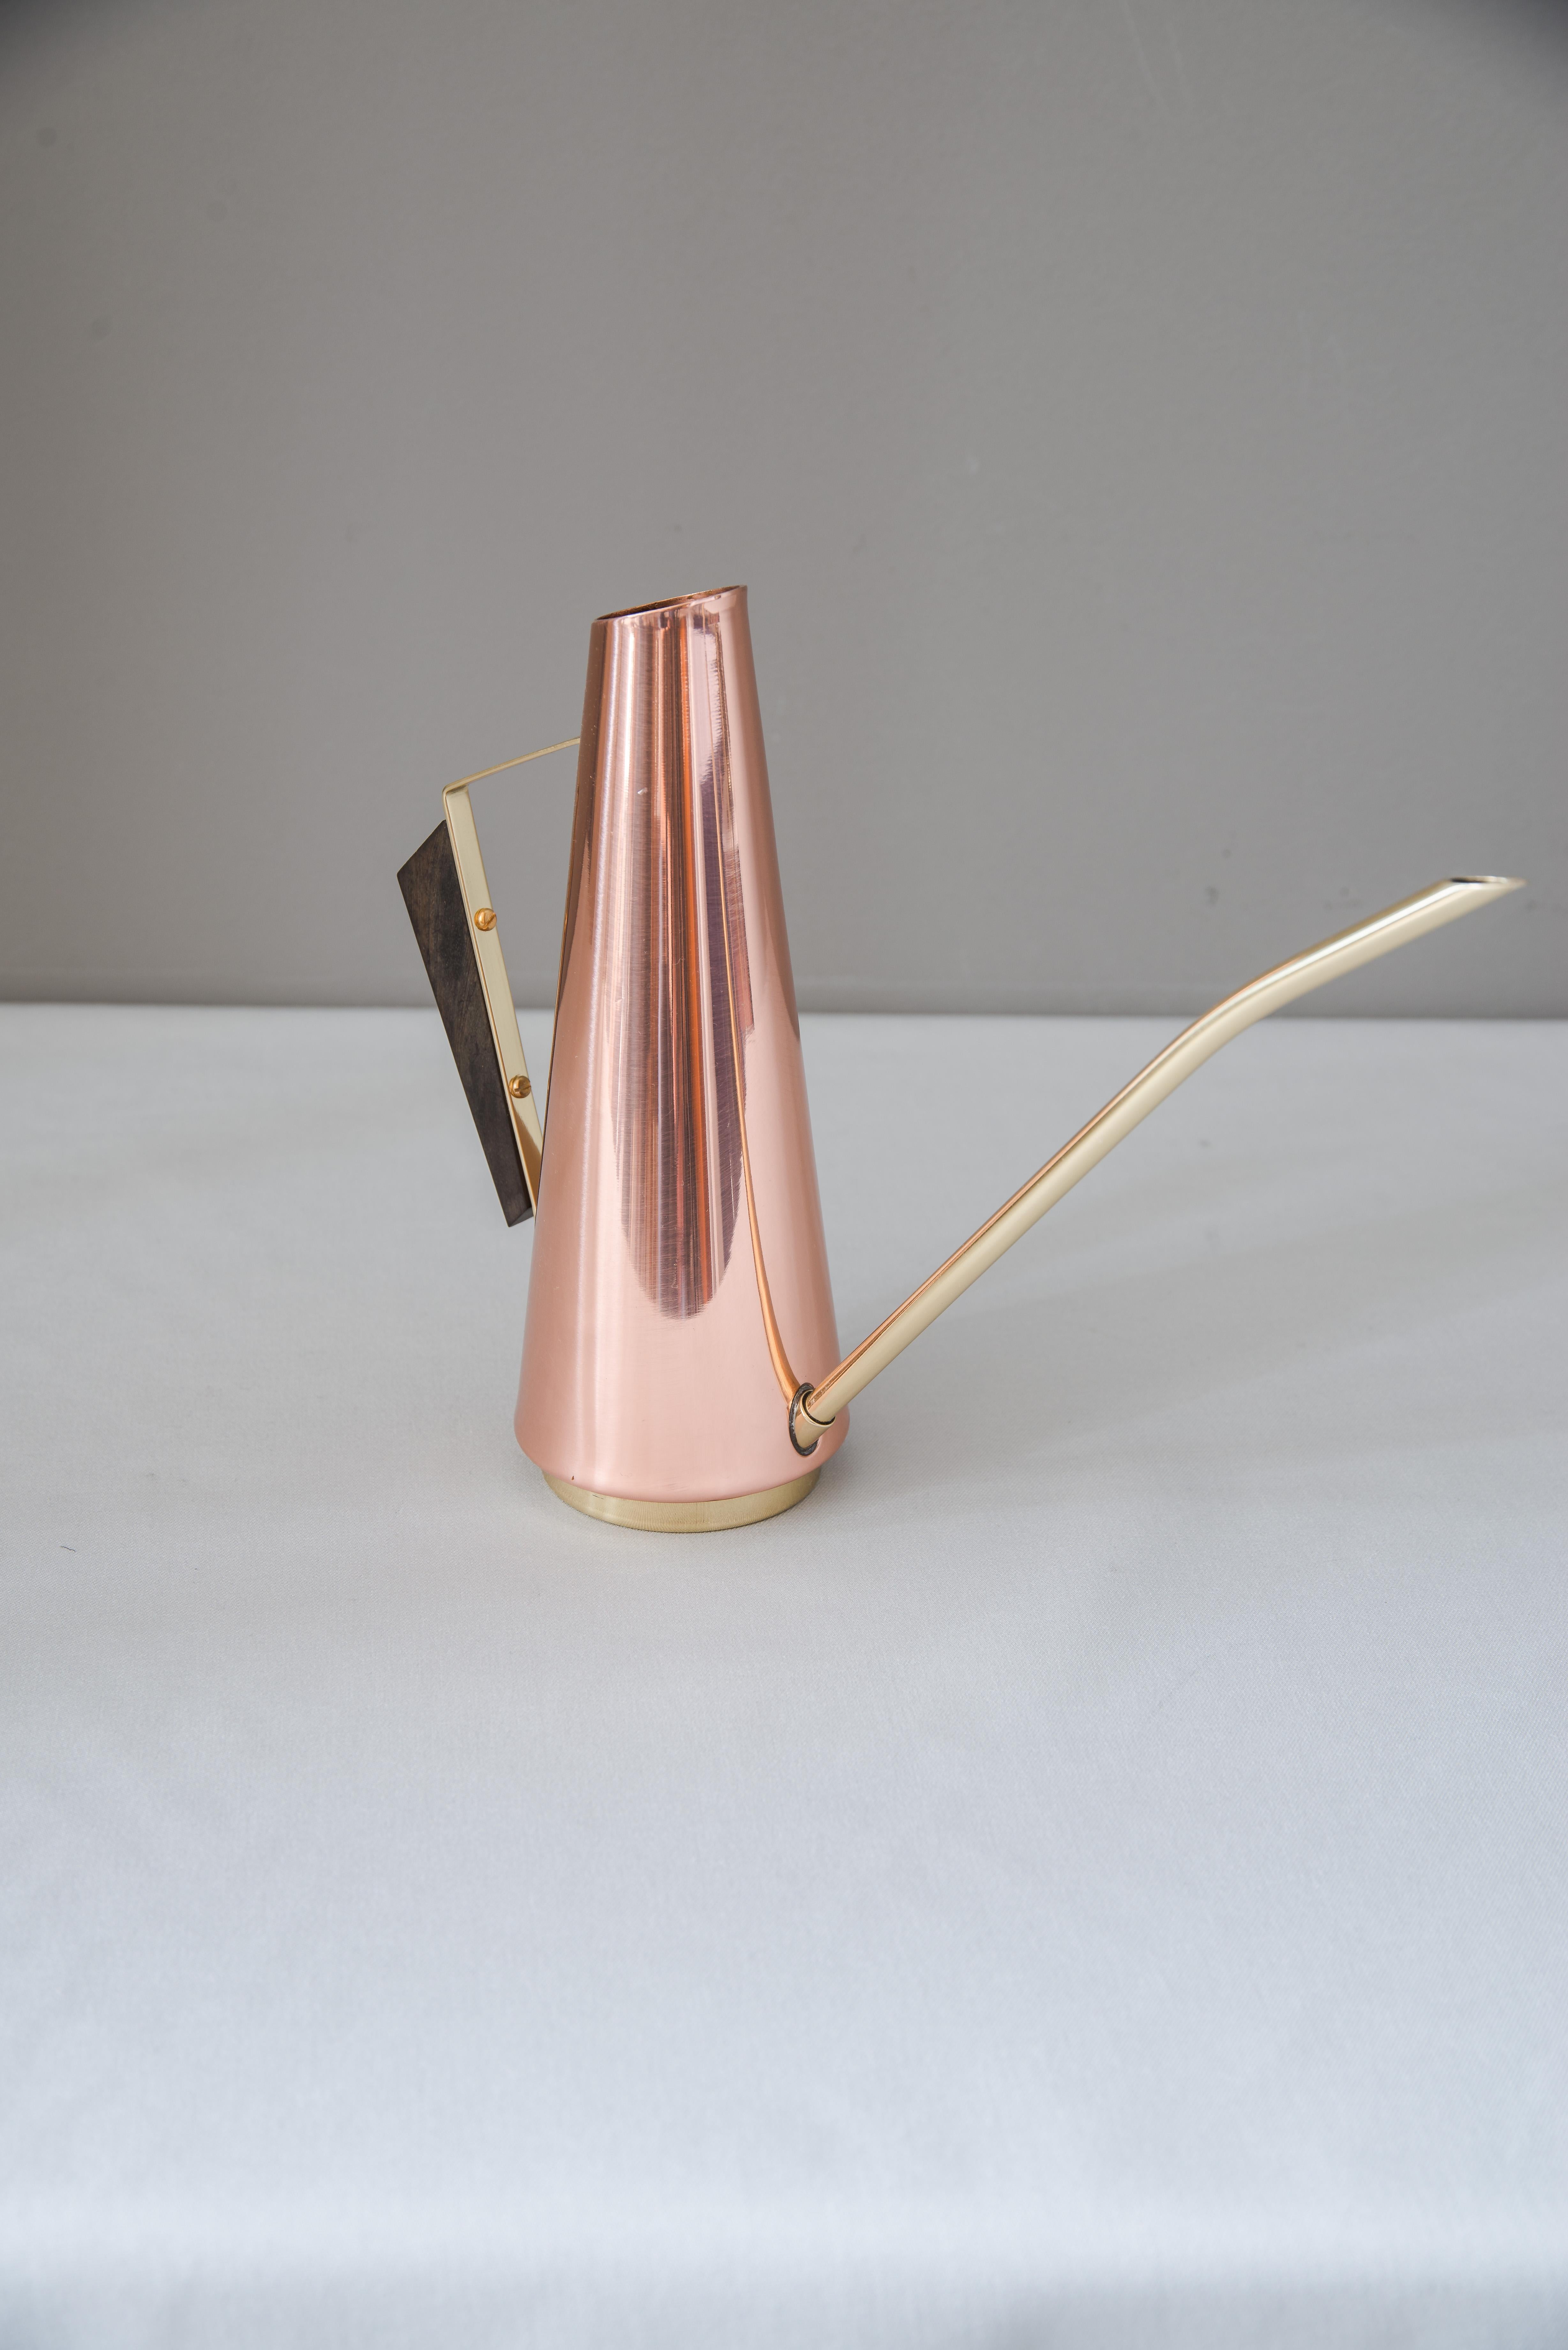 Austrian Copper Watering Can with Wood Handle and Brass Parts, circa 1960s